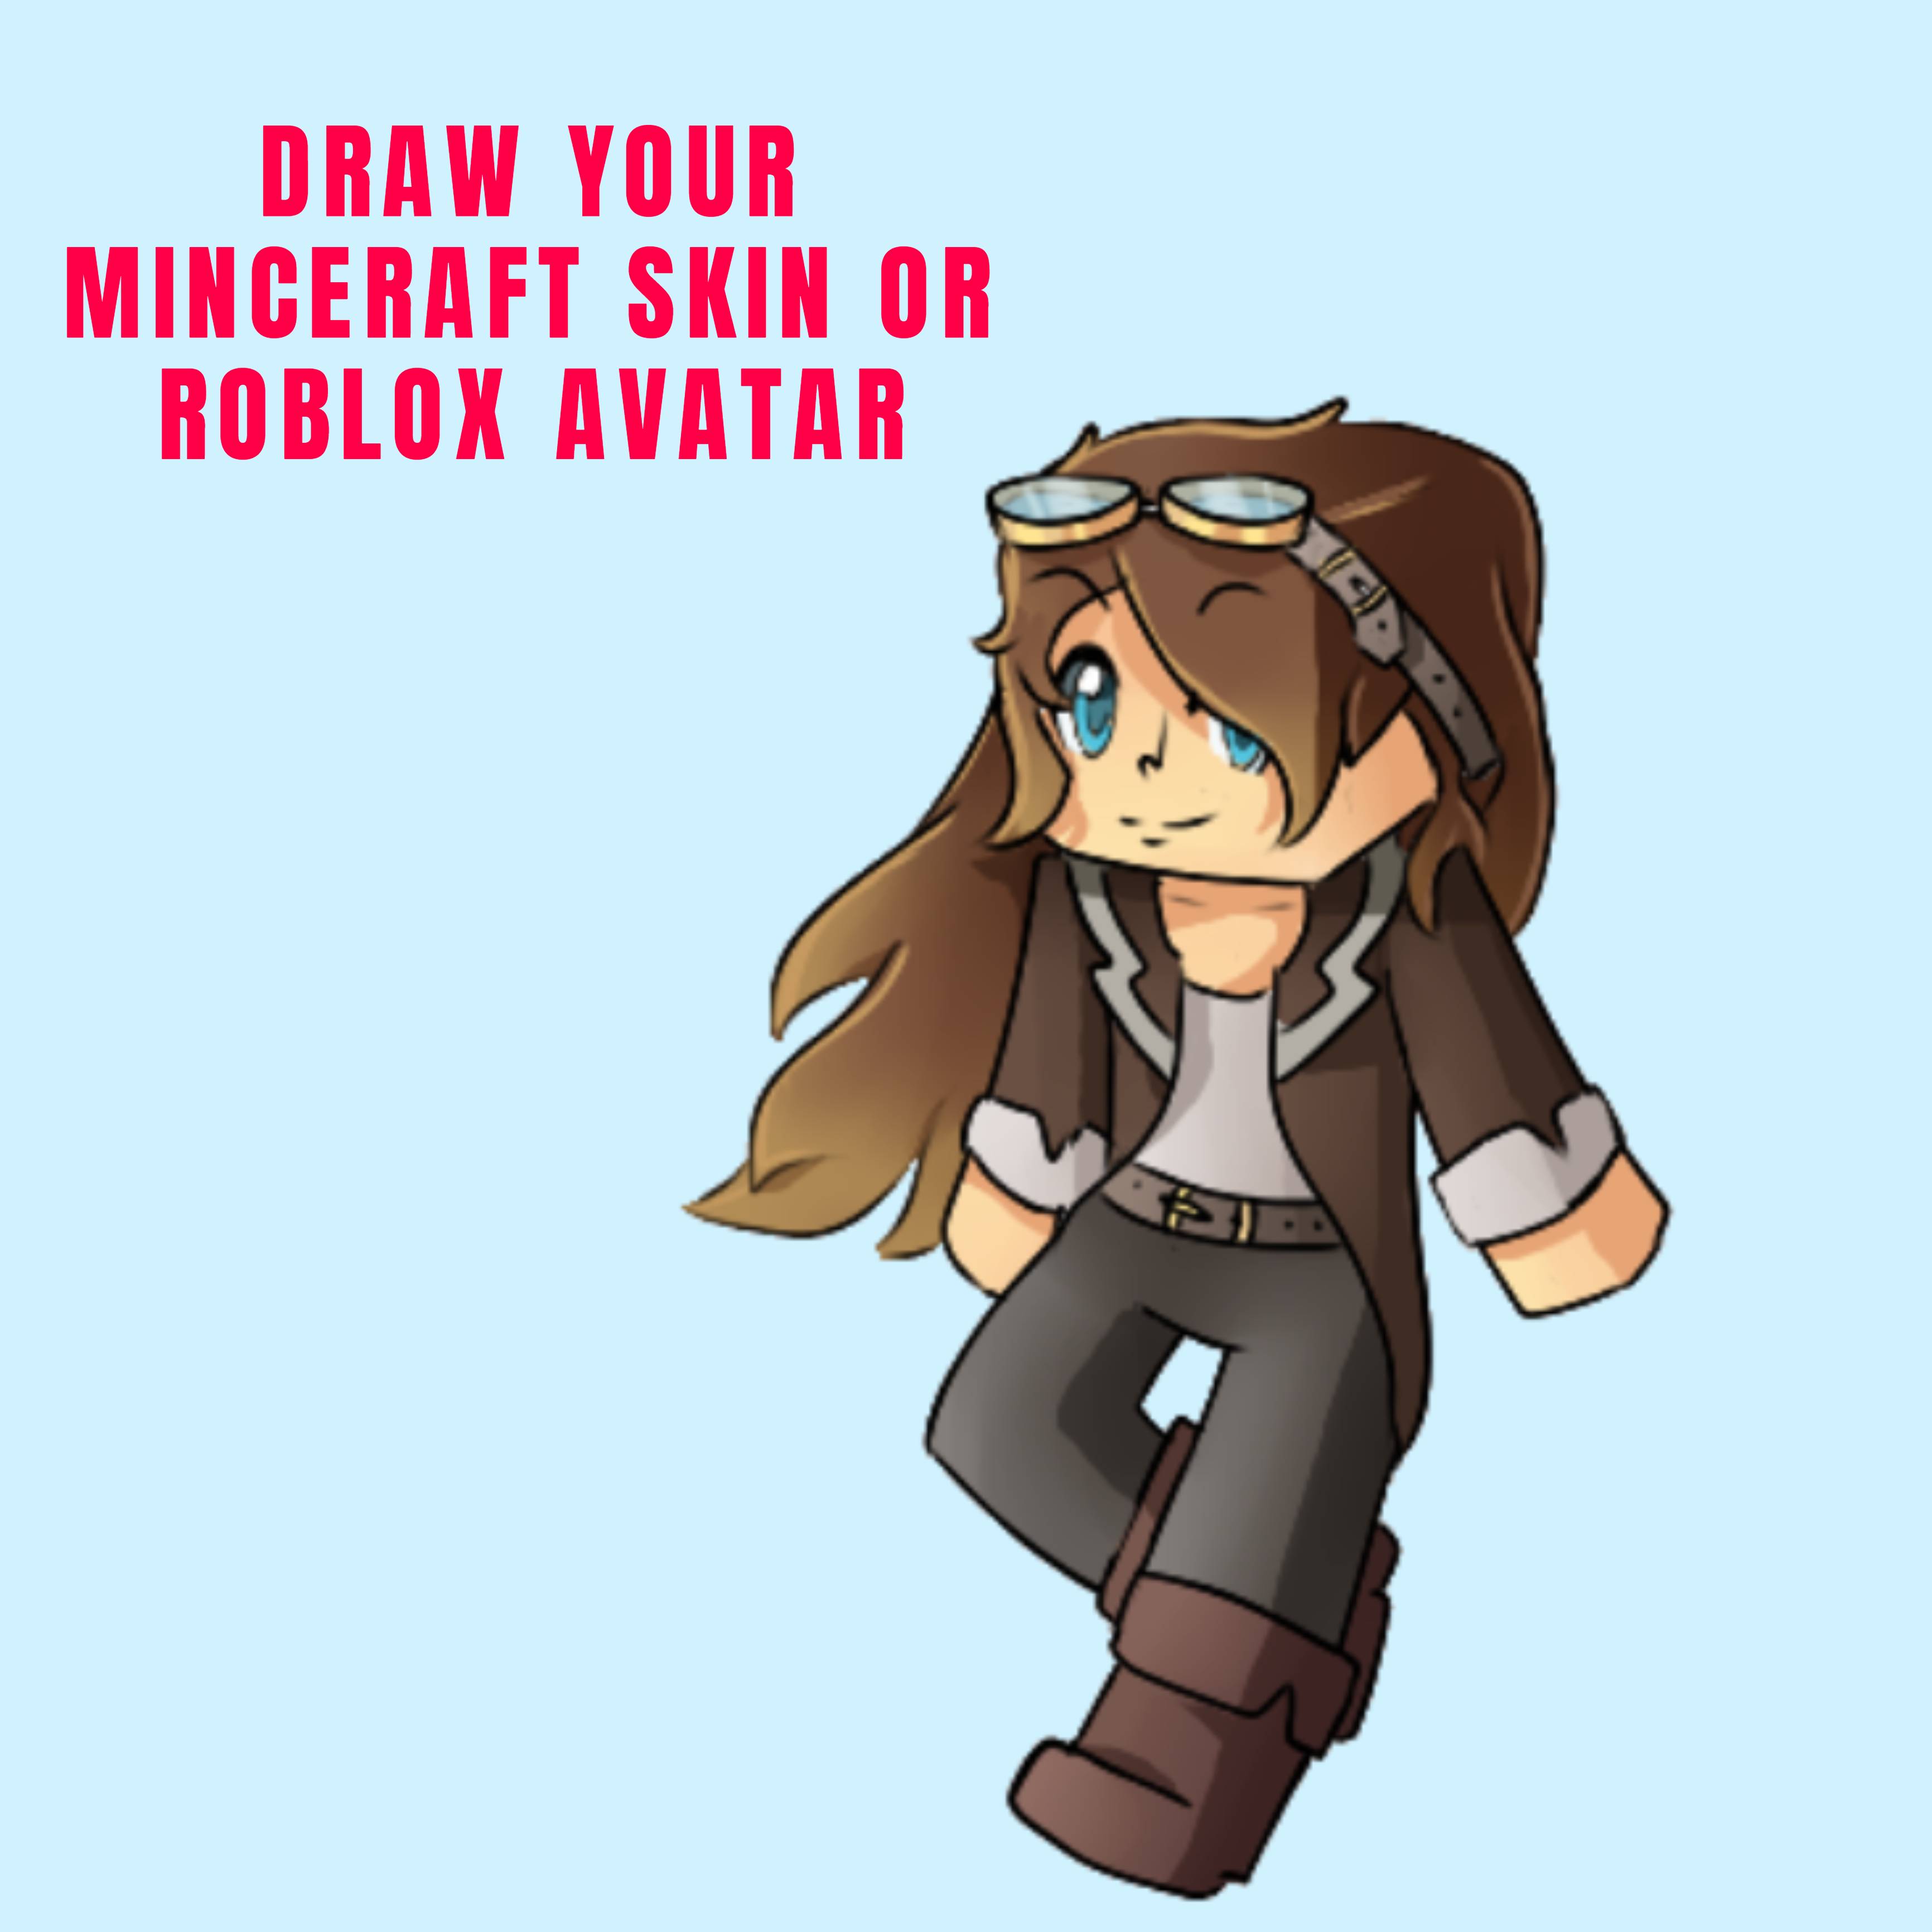 Draw Your Minecraft Skin Or Roblox Avatar By Asmae Daoud - drawing my roblox avatar in pixel art creator